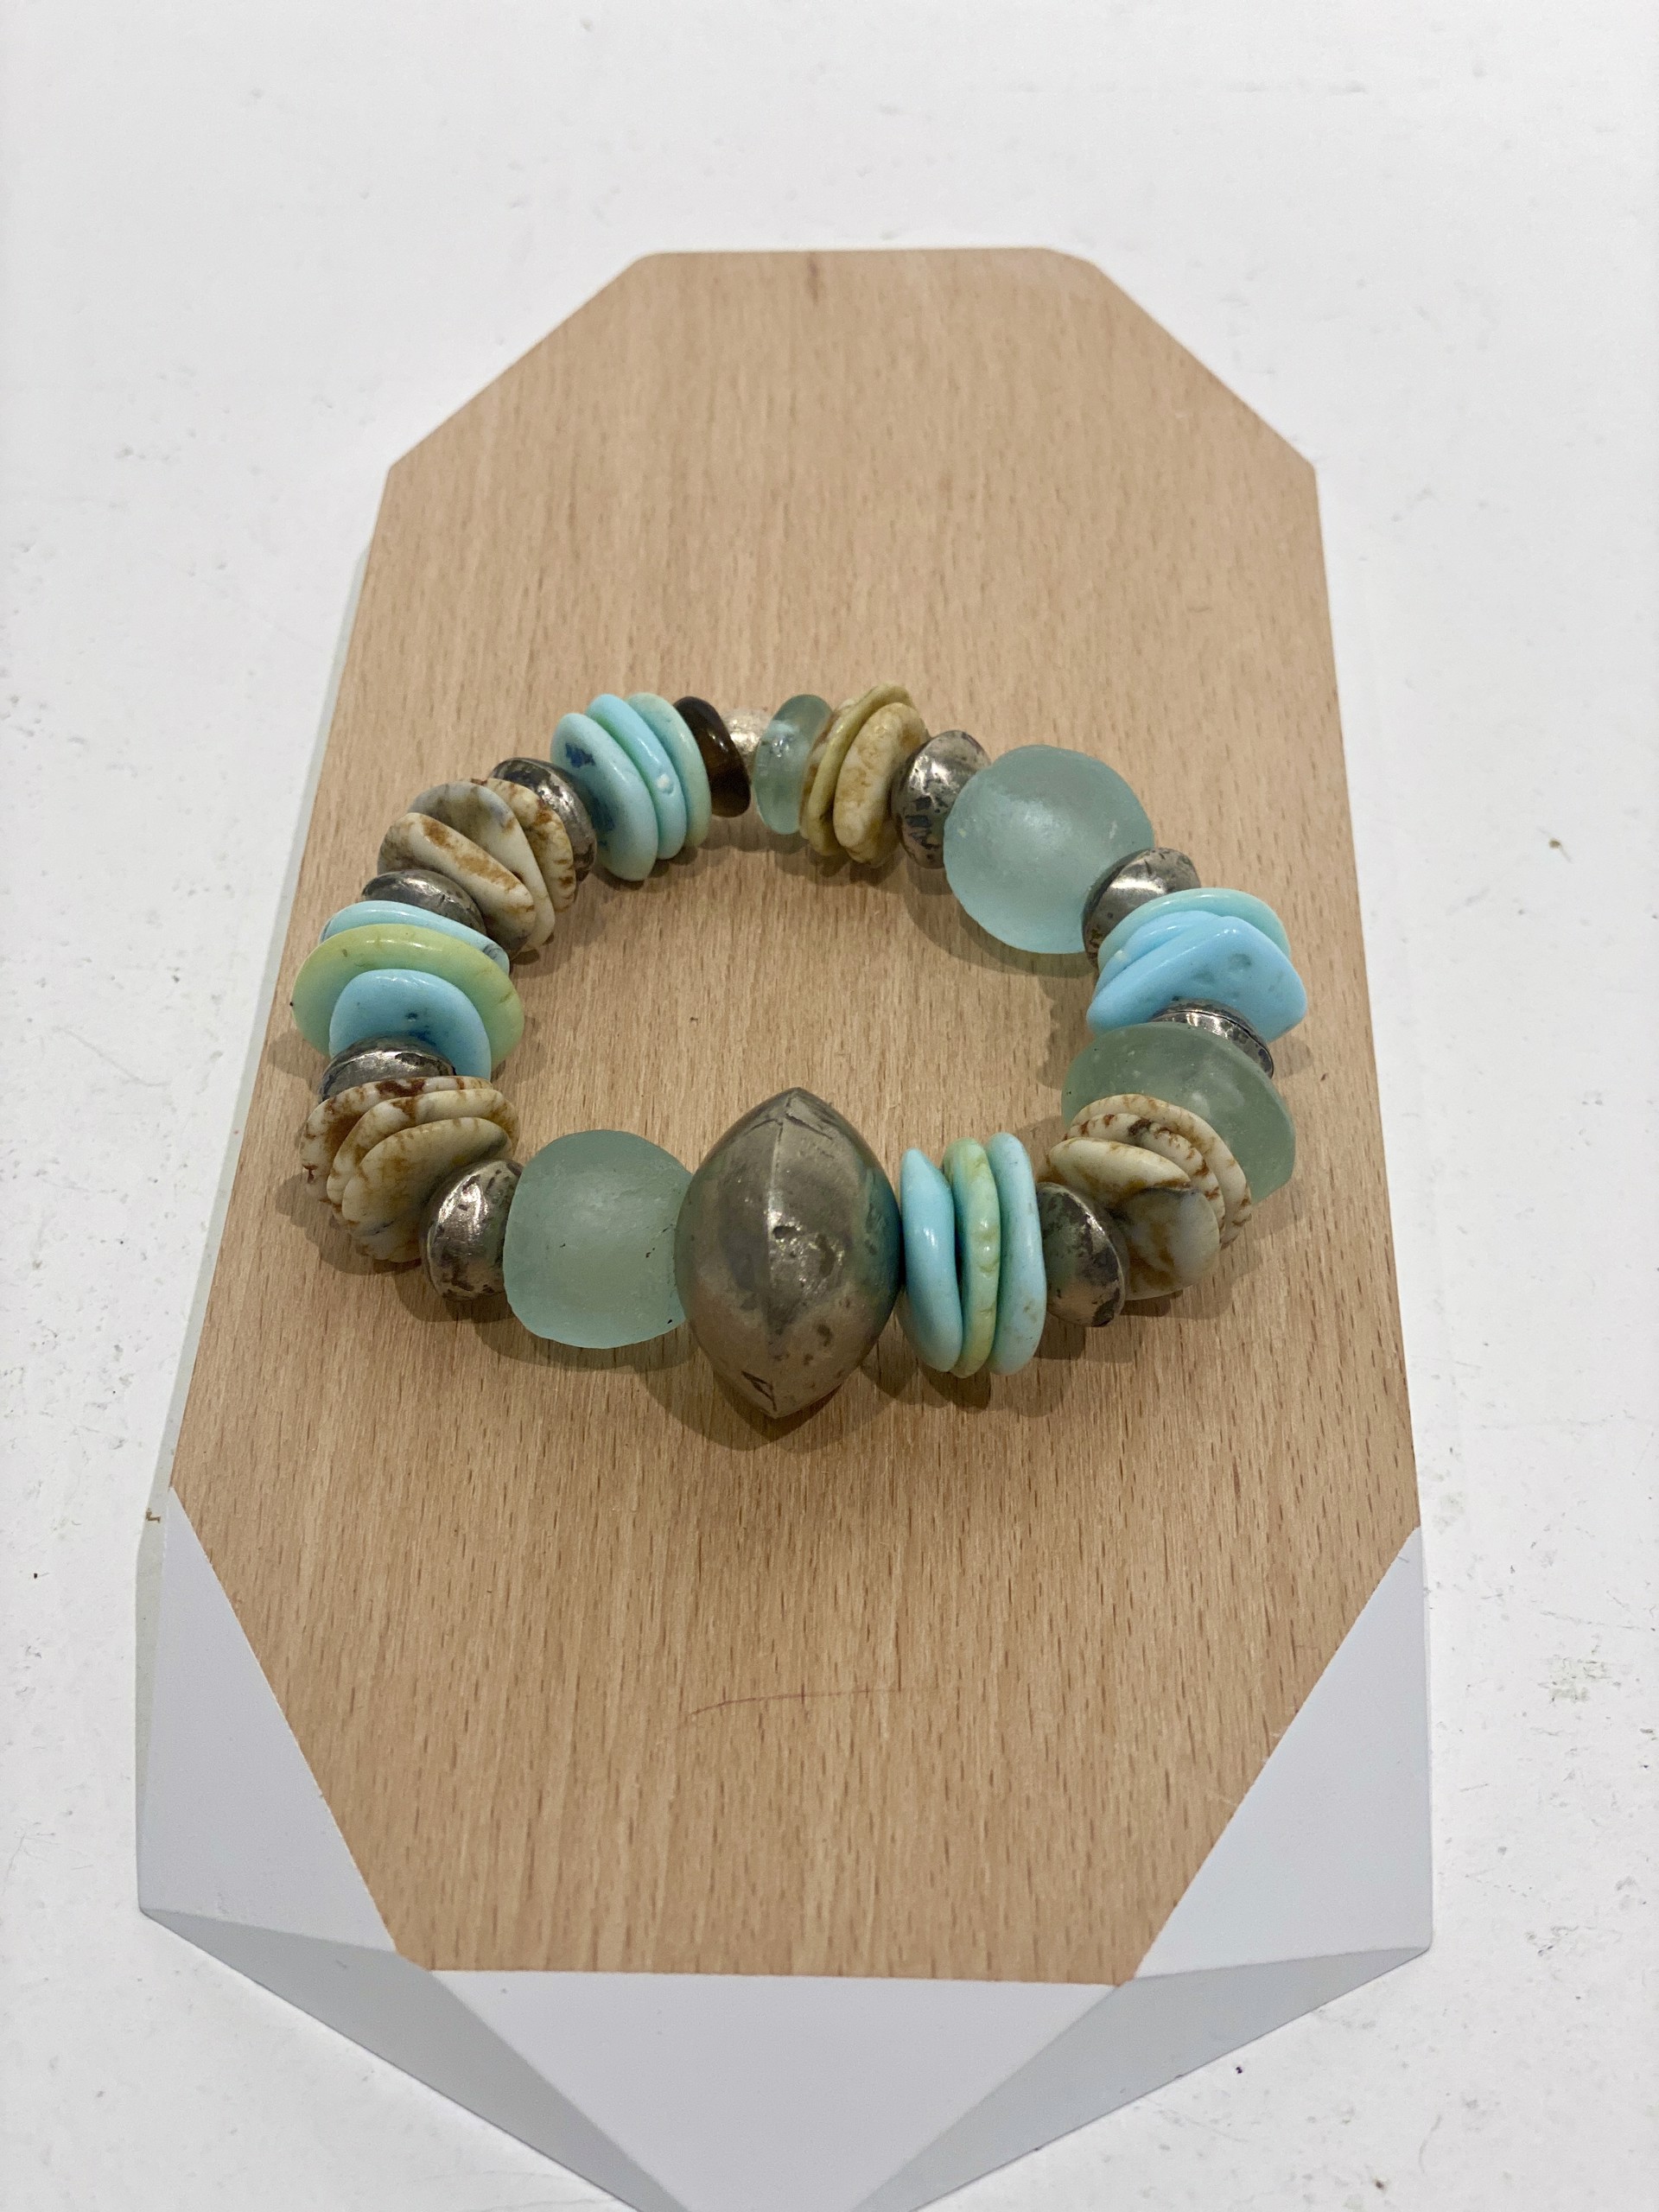 African glass and coin silver bracelet #2 by Melissa Turney